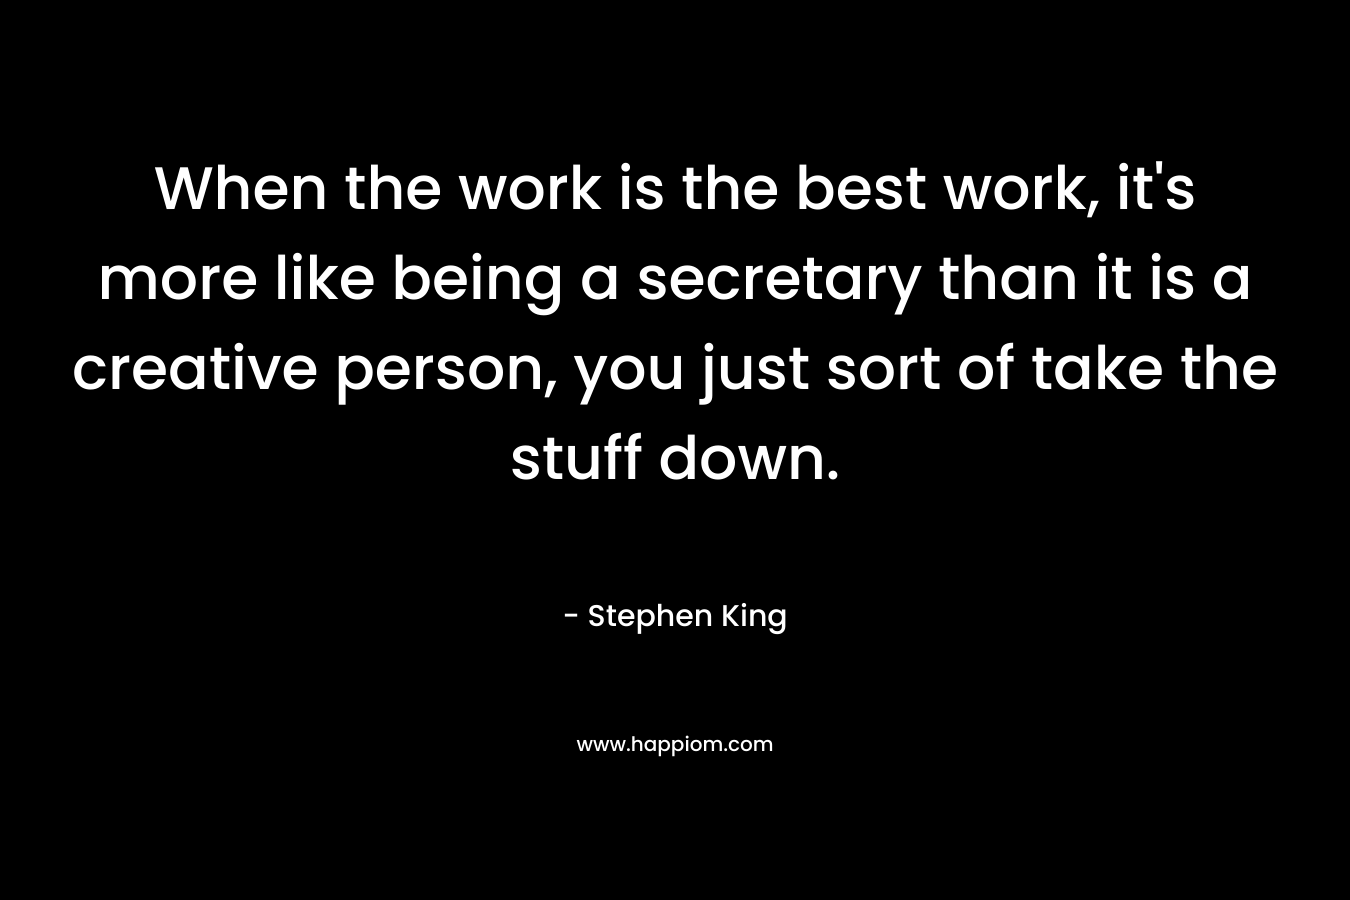 When the work is the best work, it’s more like being a secretary than it is a creative person, you just sort of take the stuff down. – Stephen King